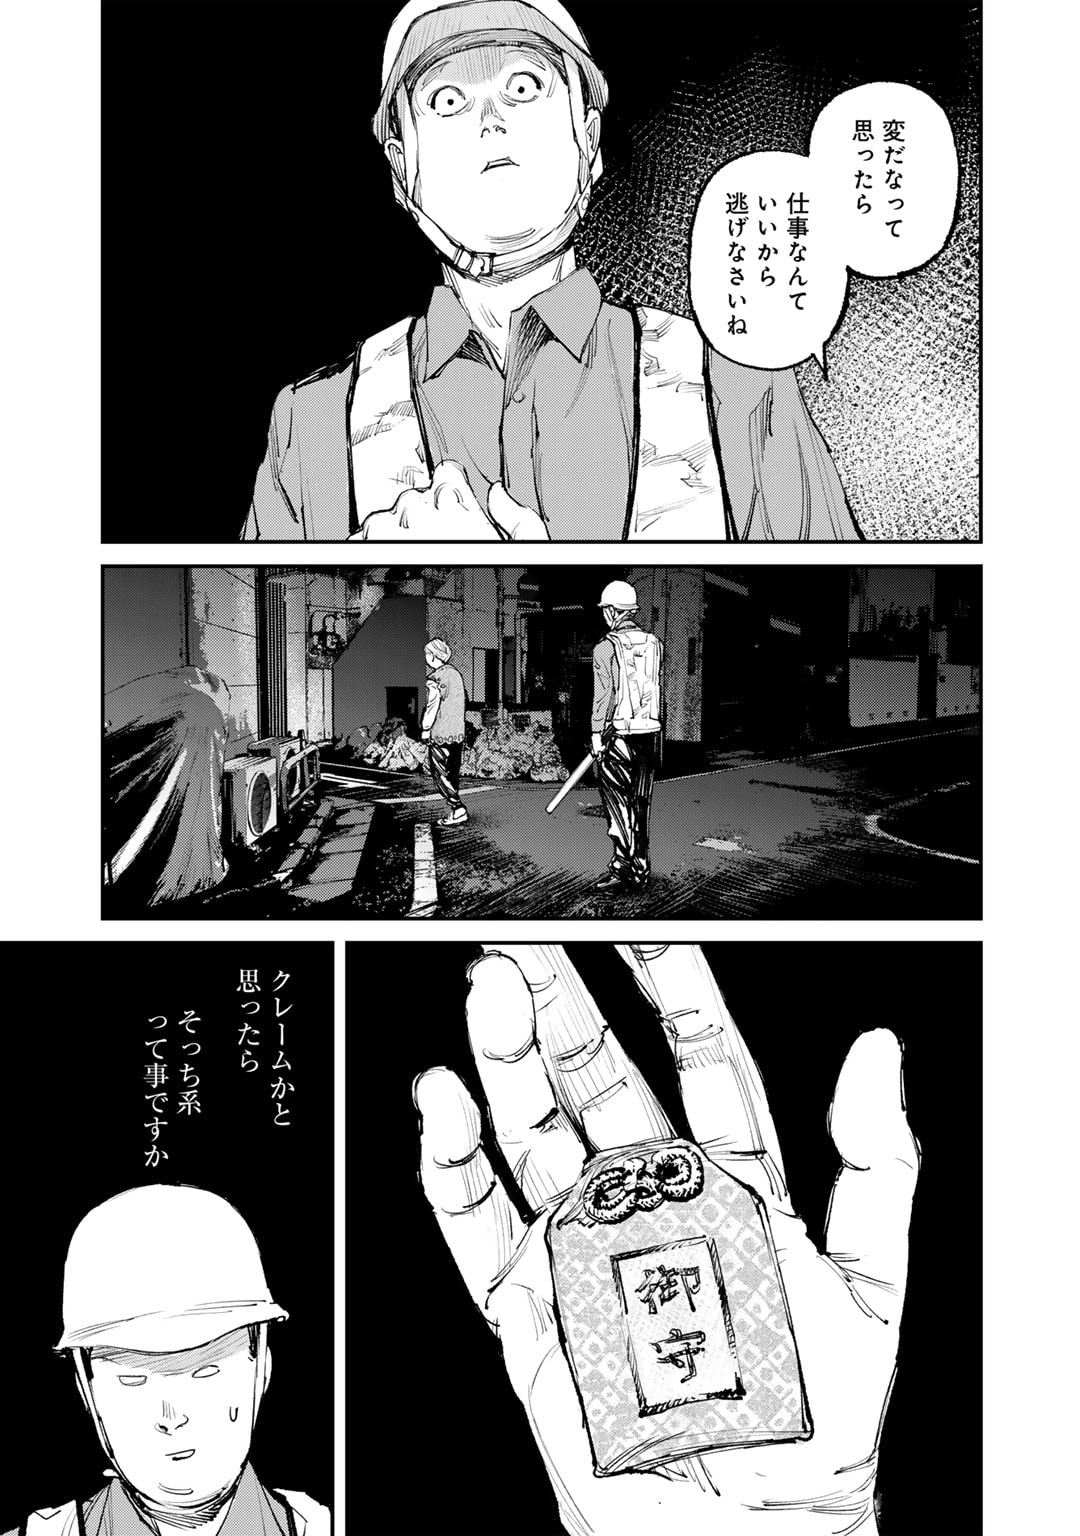 Kanata Is Into More Darker - Chapter 8 - Page 3